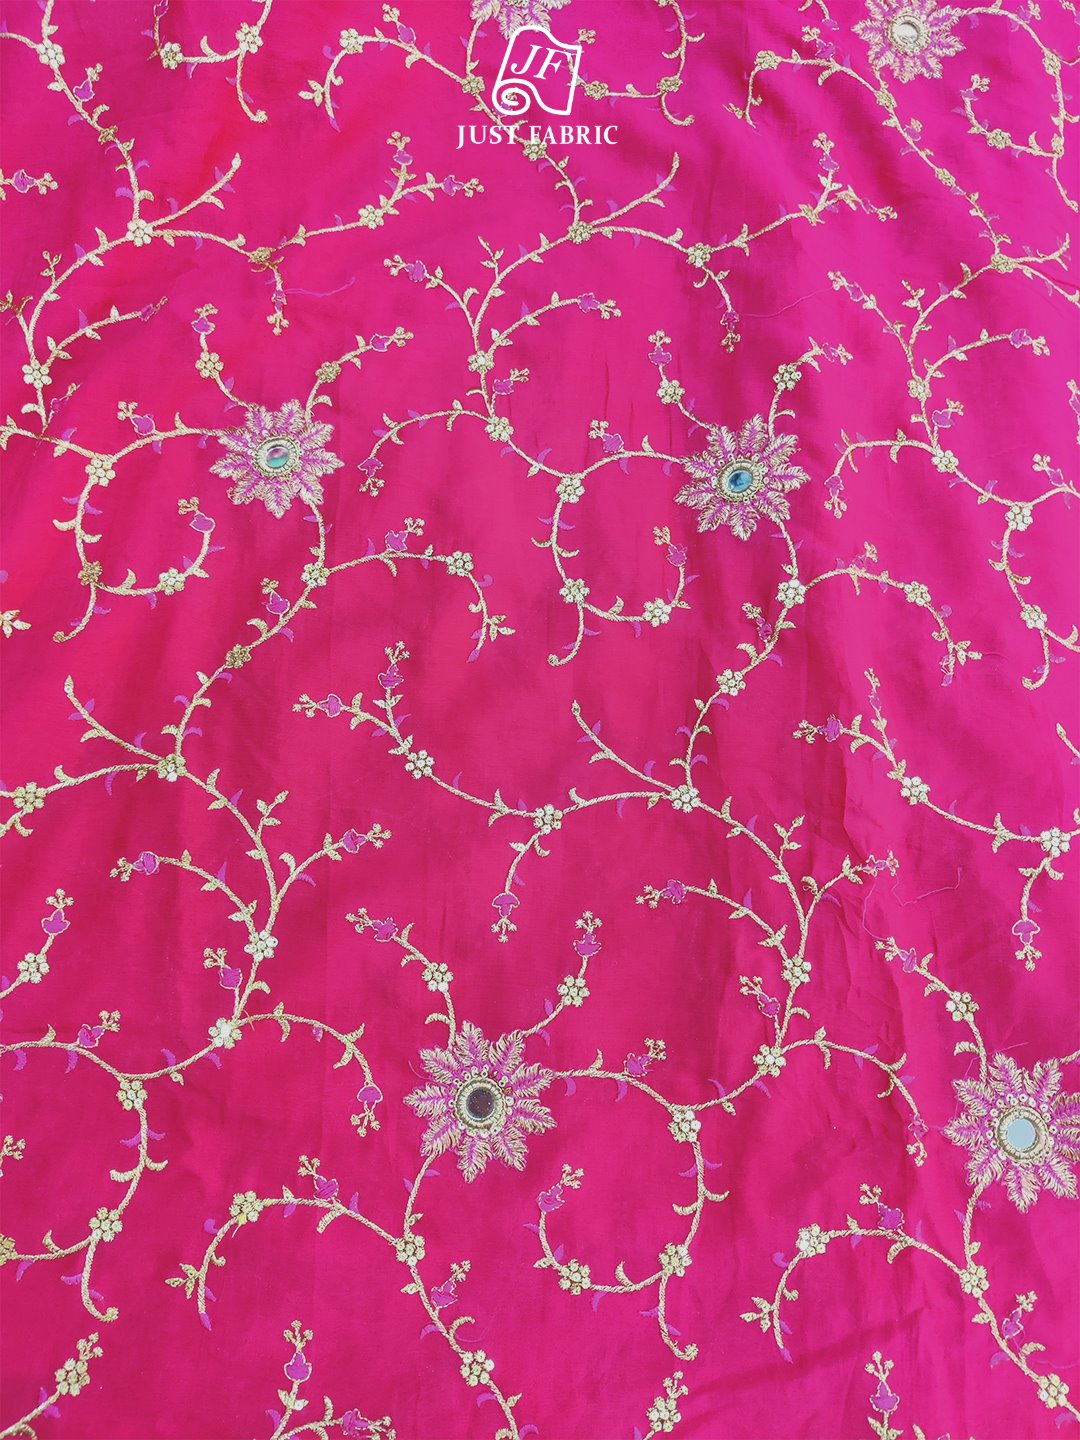 Golden Zari Thread Work Floral Jaal  All over on Georgette Fabric With  Embroidery (44" Inch Width) JUST FABRIC